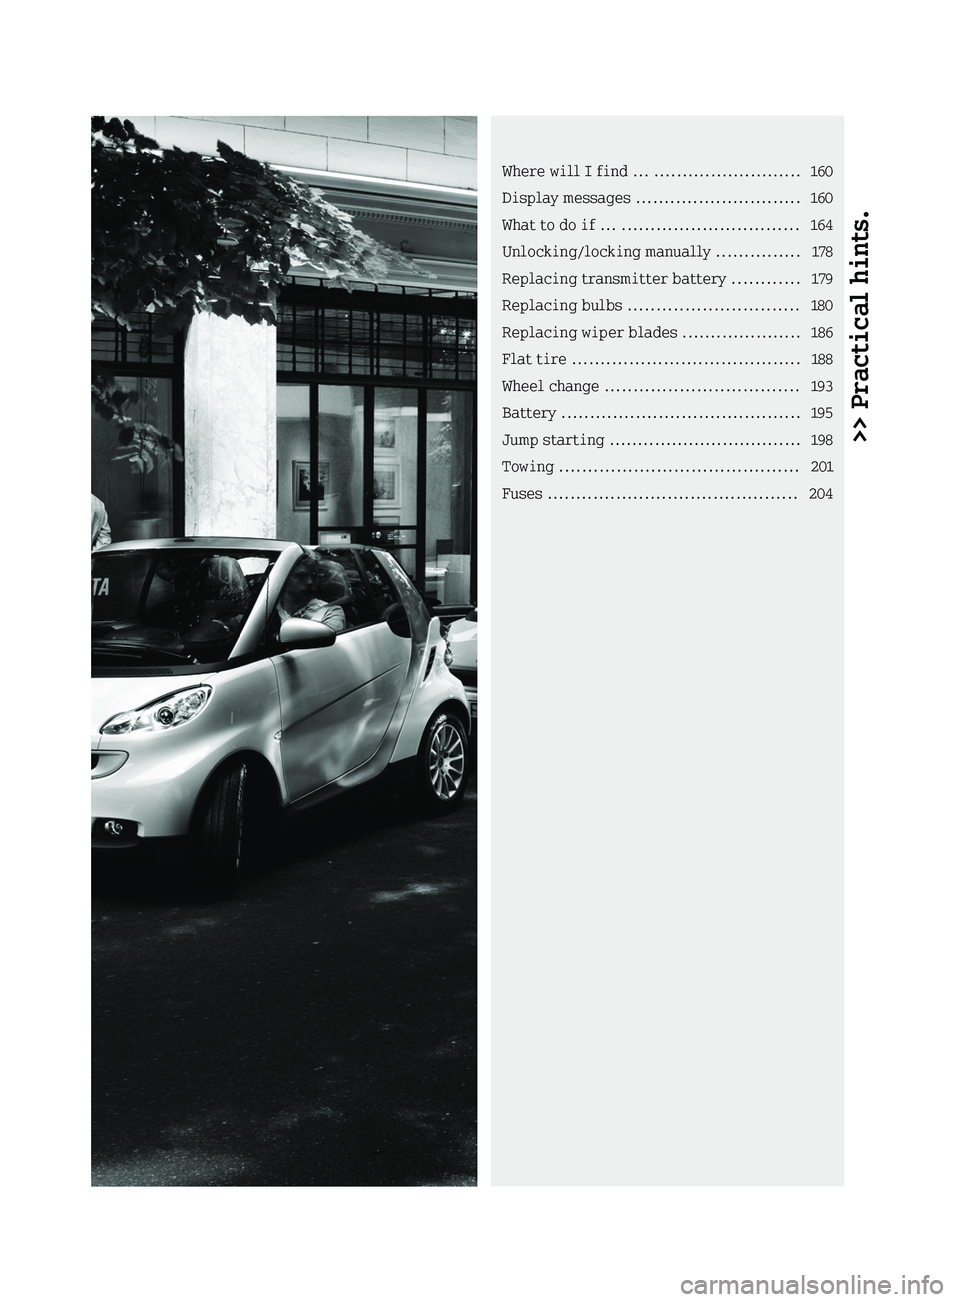 SMART FORTWO COUPE 2011 User Guide >> Practical hints.Where will I find ... ..........................160
Display messages .............................160
What to do if ... ...............................164
Unlocking/locking manually